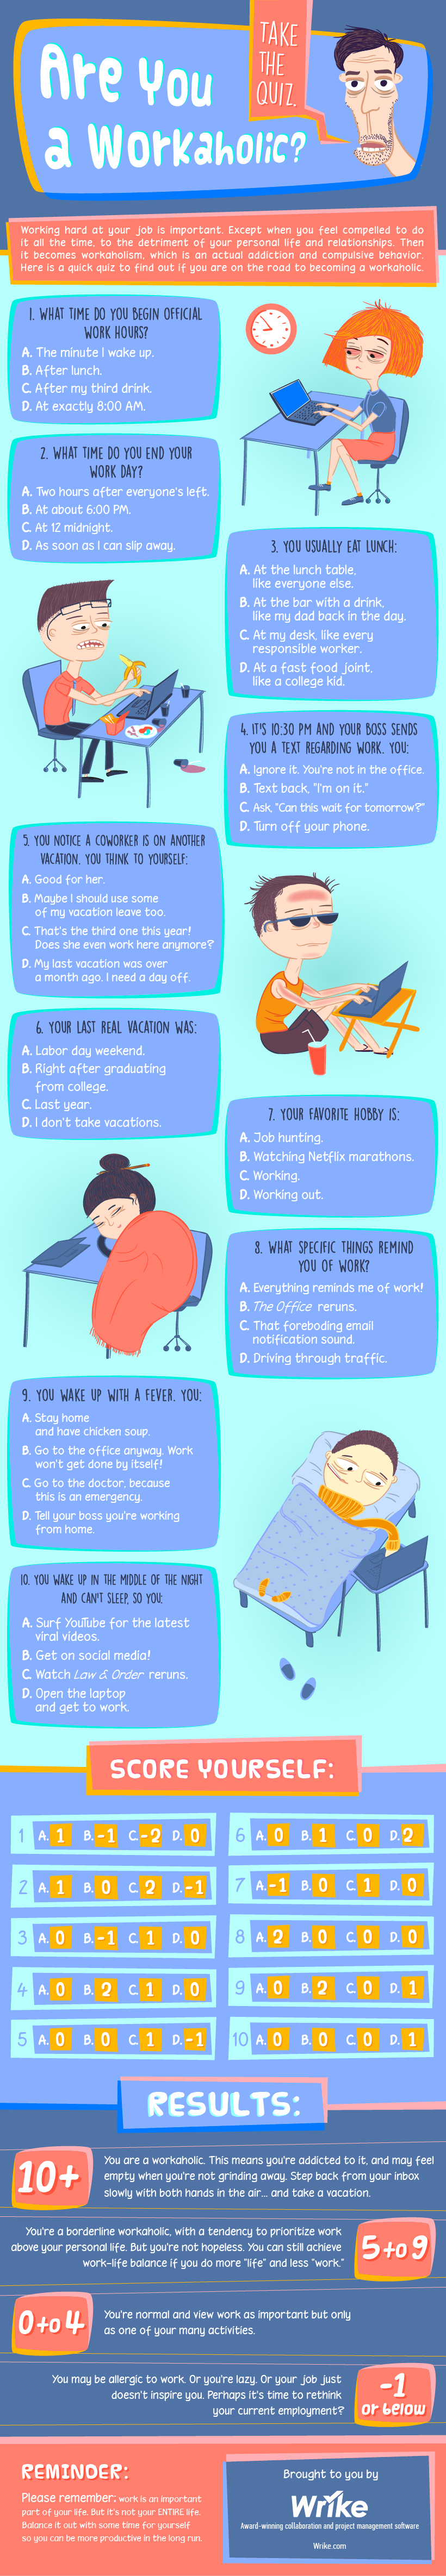 How to Find Out If You're a Workaholic (#Infographic)